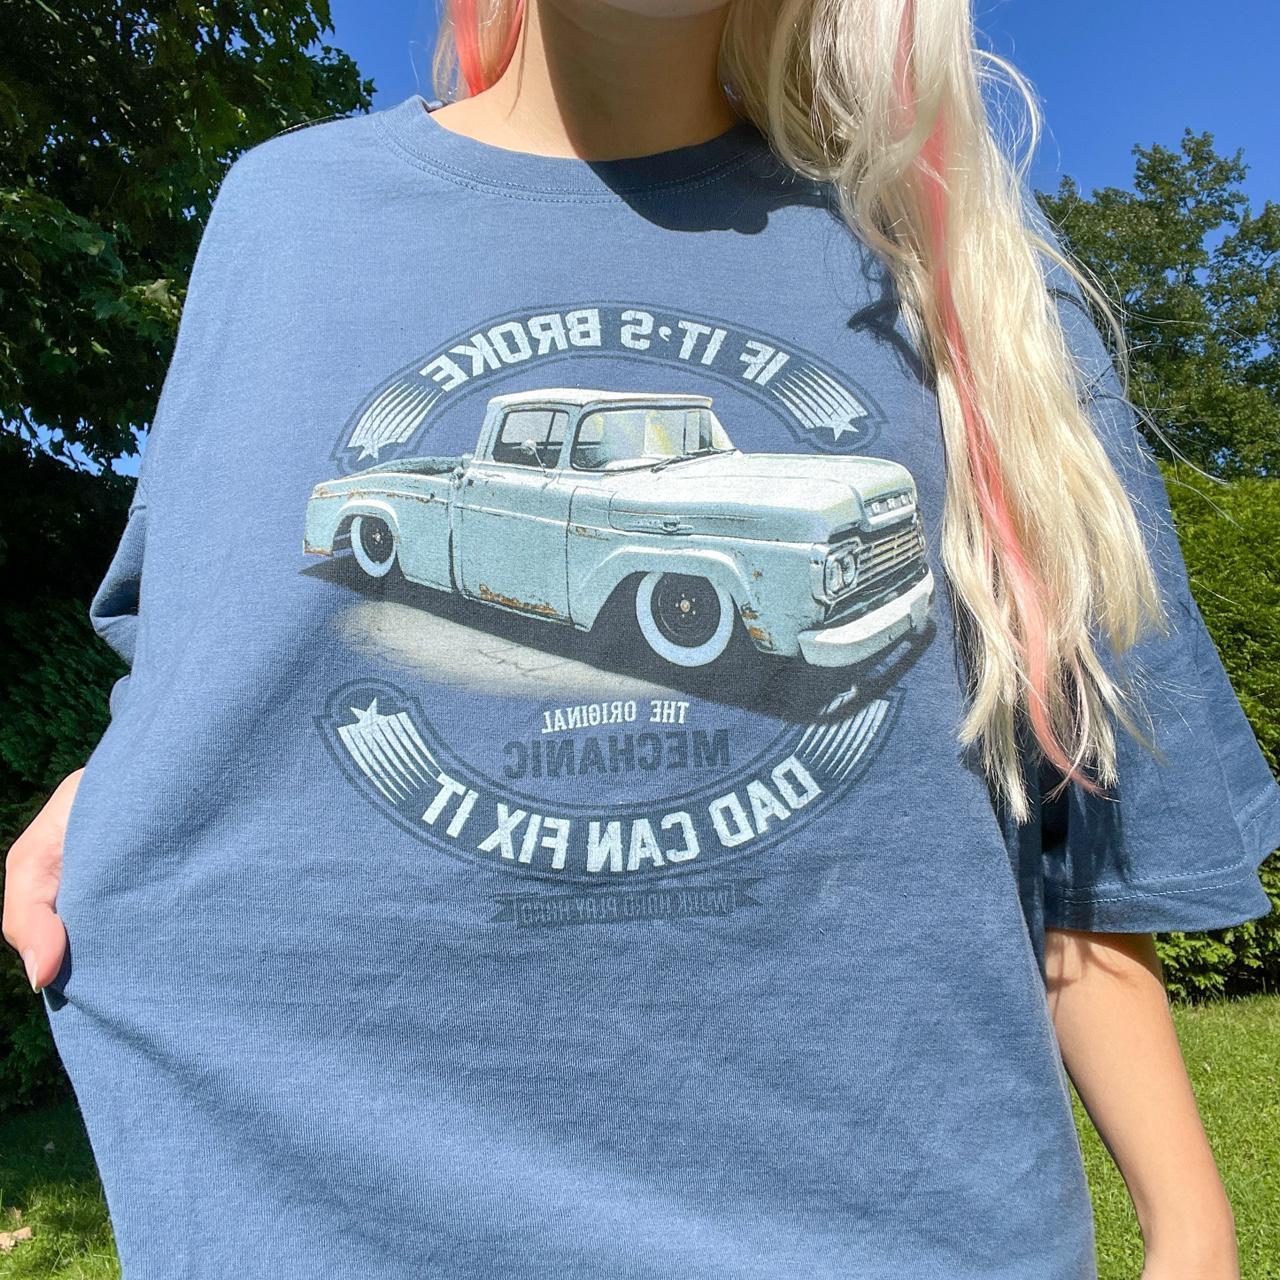 Product Image 3 - Vintage classic car graphic T-shirt🤎

Navy